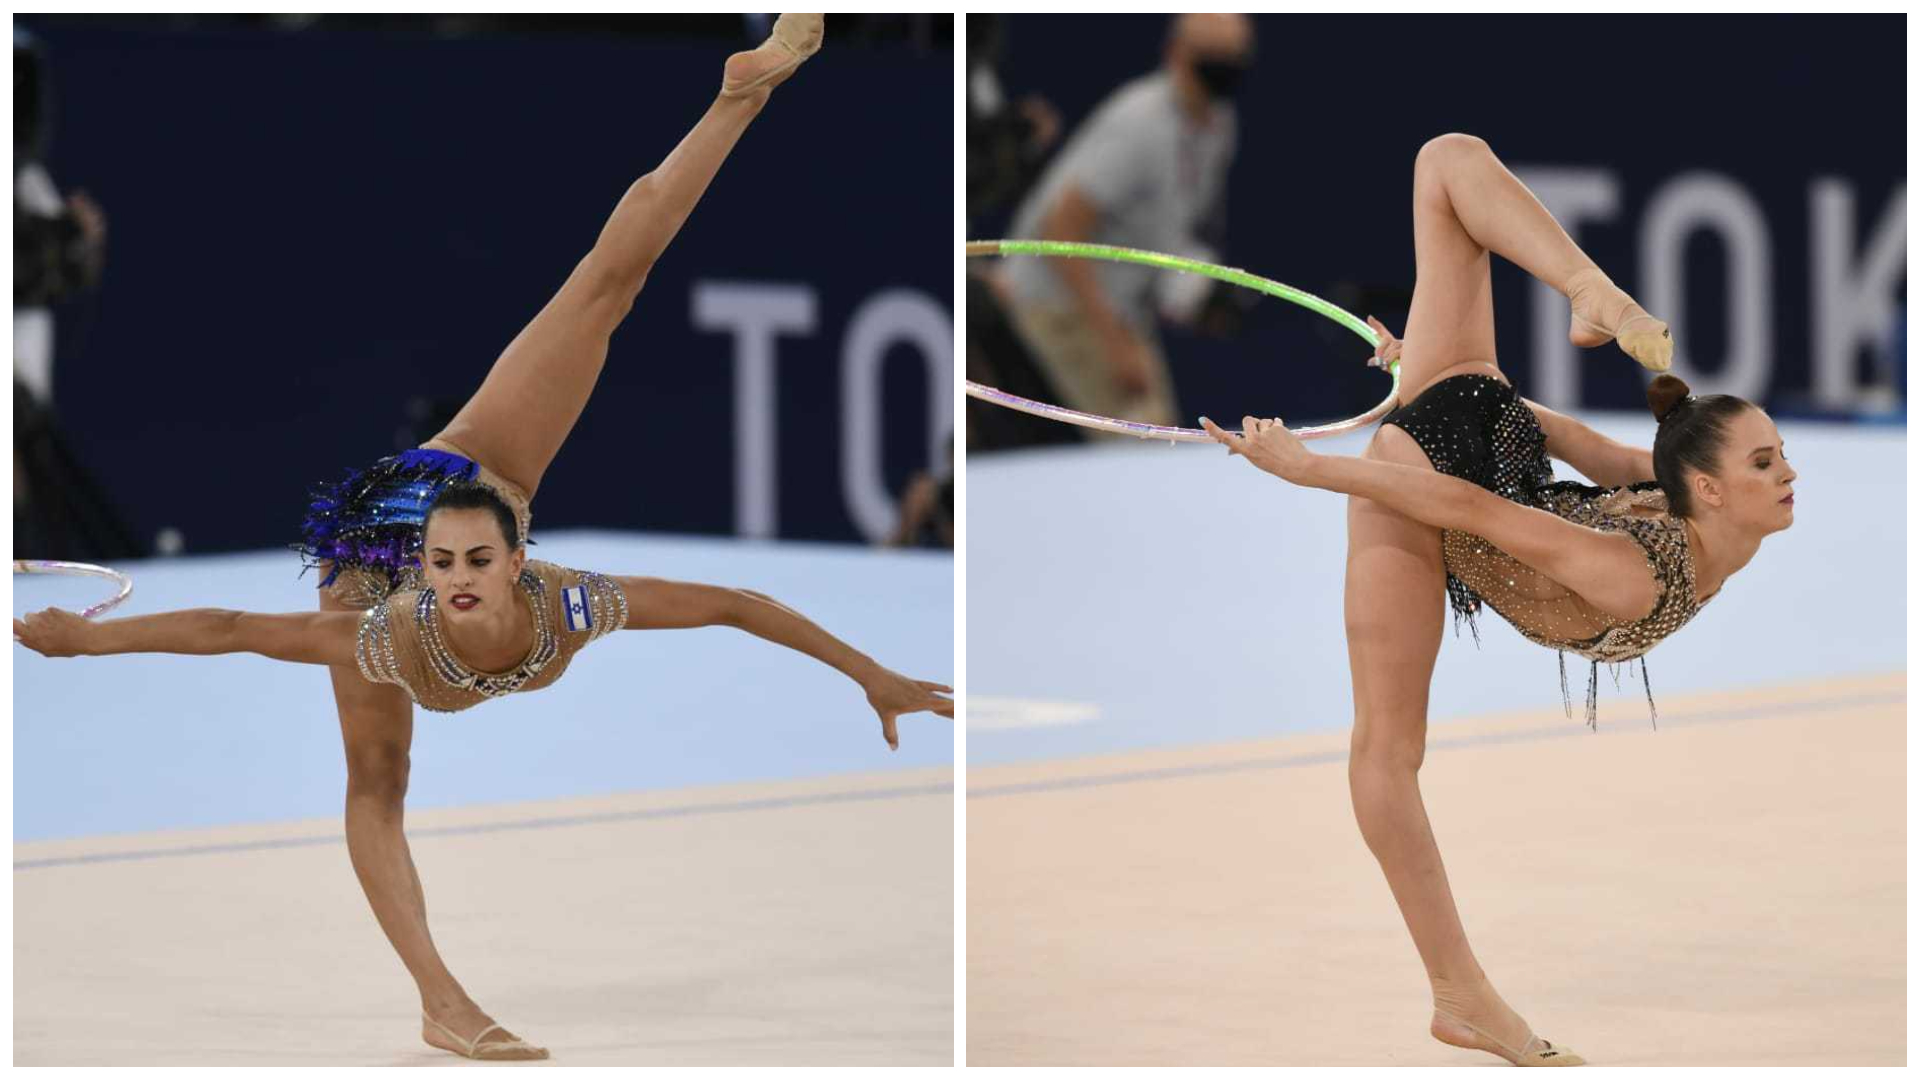 Israel S Two Medal Hope Rhythmic Gymnasts Advance To Saturday S Olympic Finals The Times Of Israel